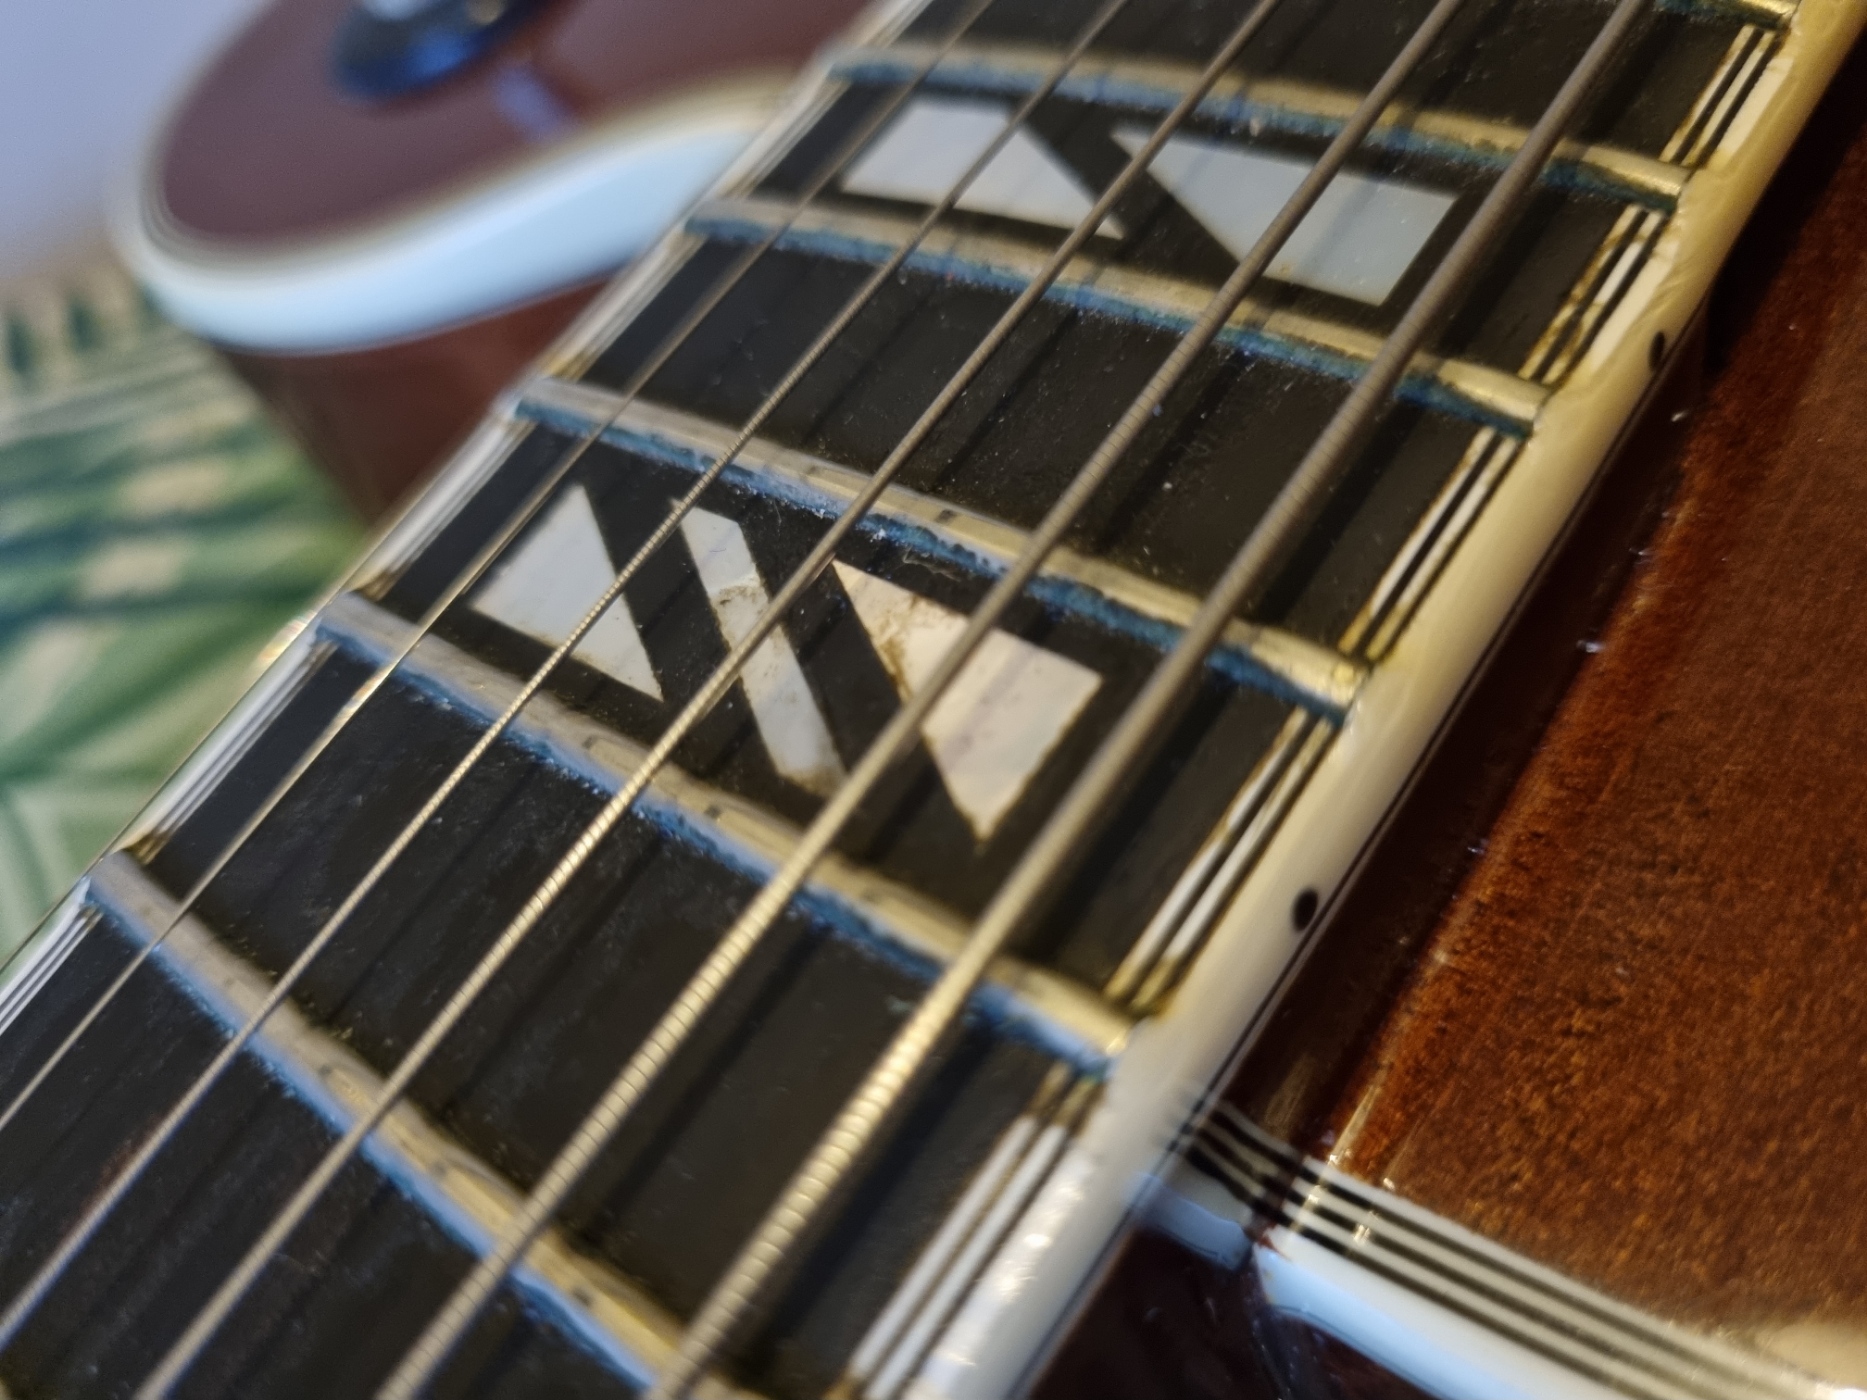 Fretboard pitting - What's the deal?-20210913_190751-jpg